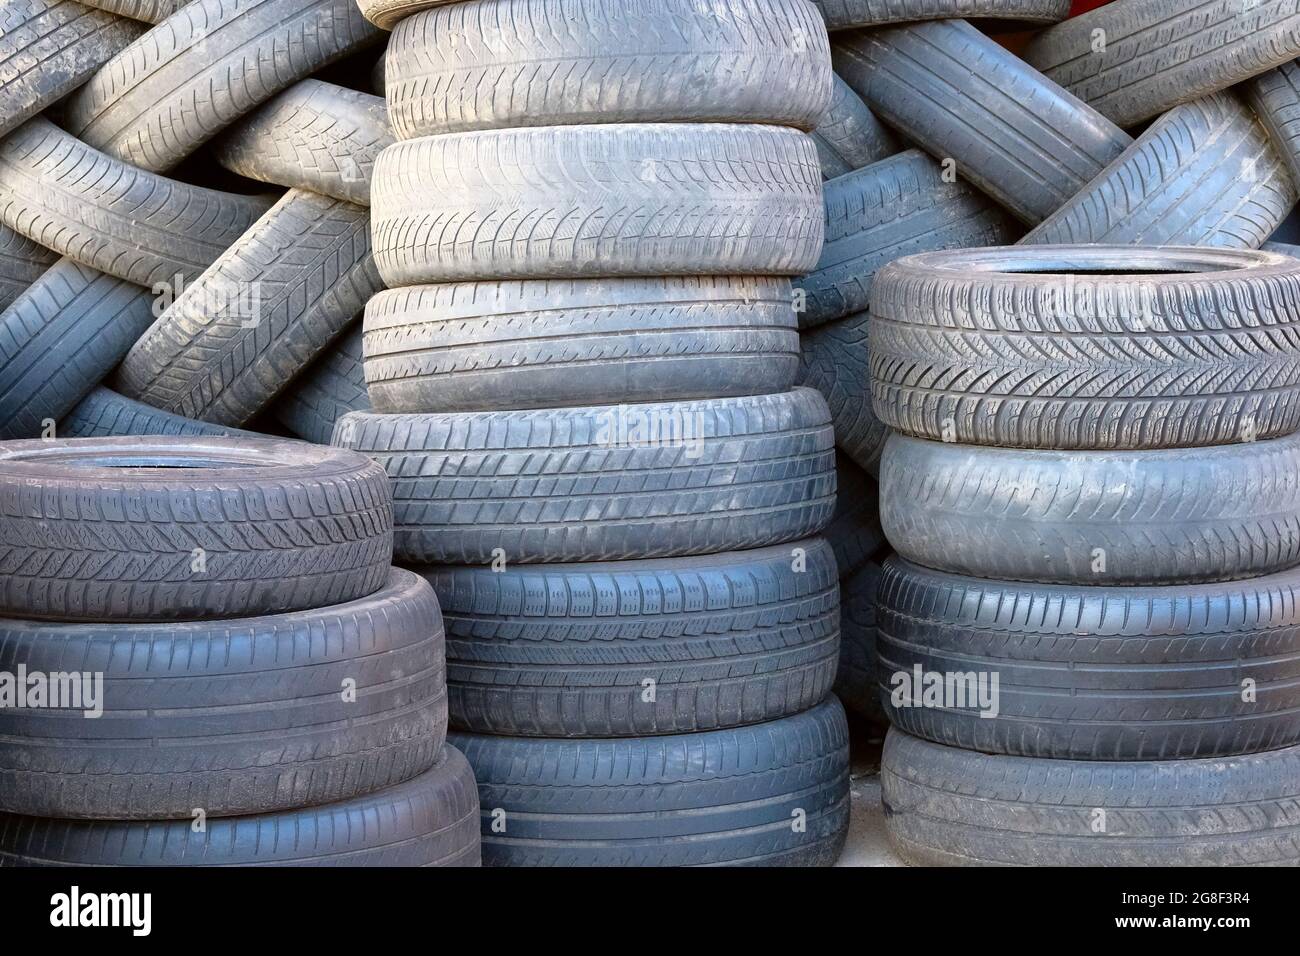 Recycling materials concept. Lots of black used car tires stacked in a pile. Car recycling. Ecology environment protection. Stock Photo